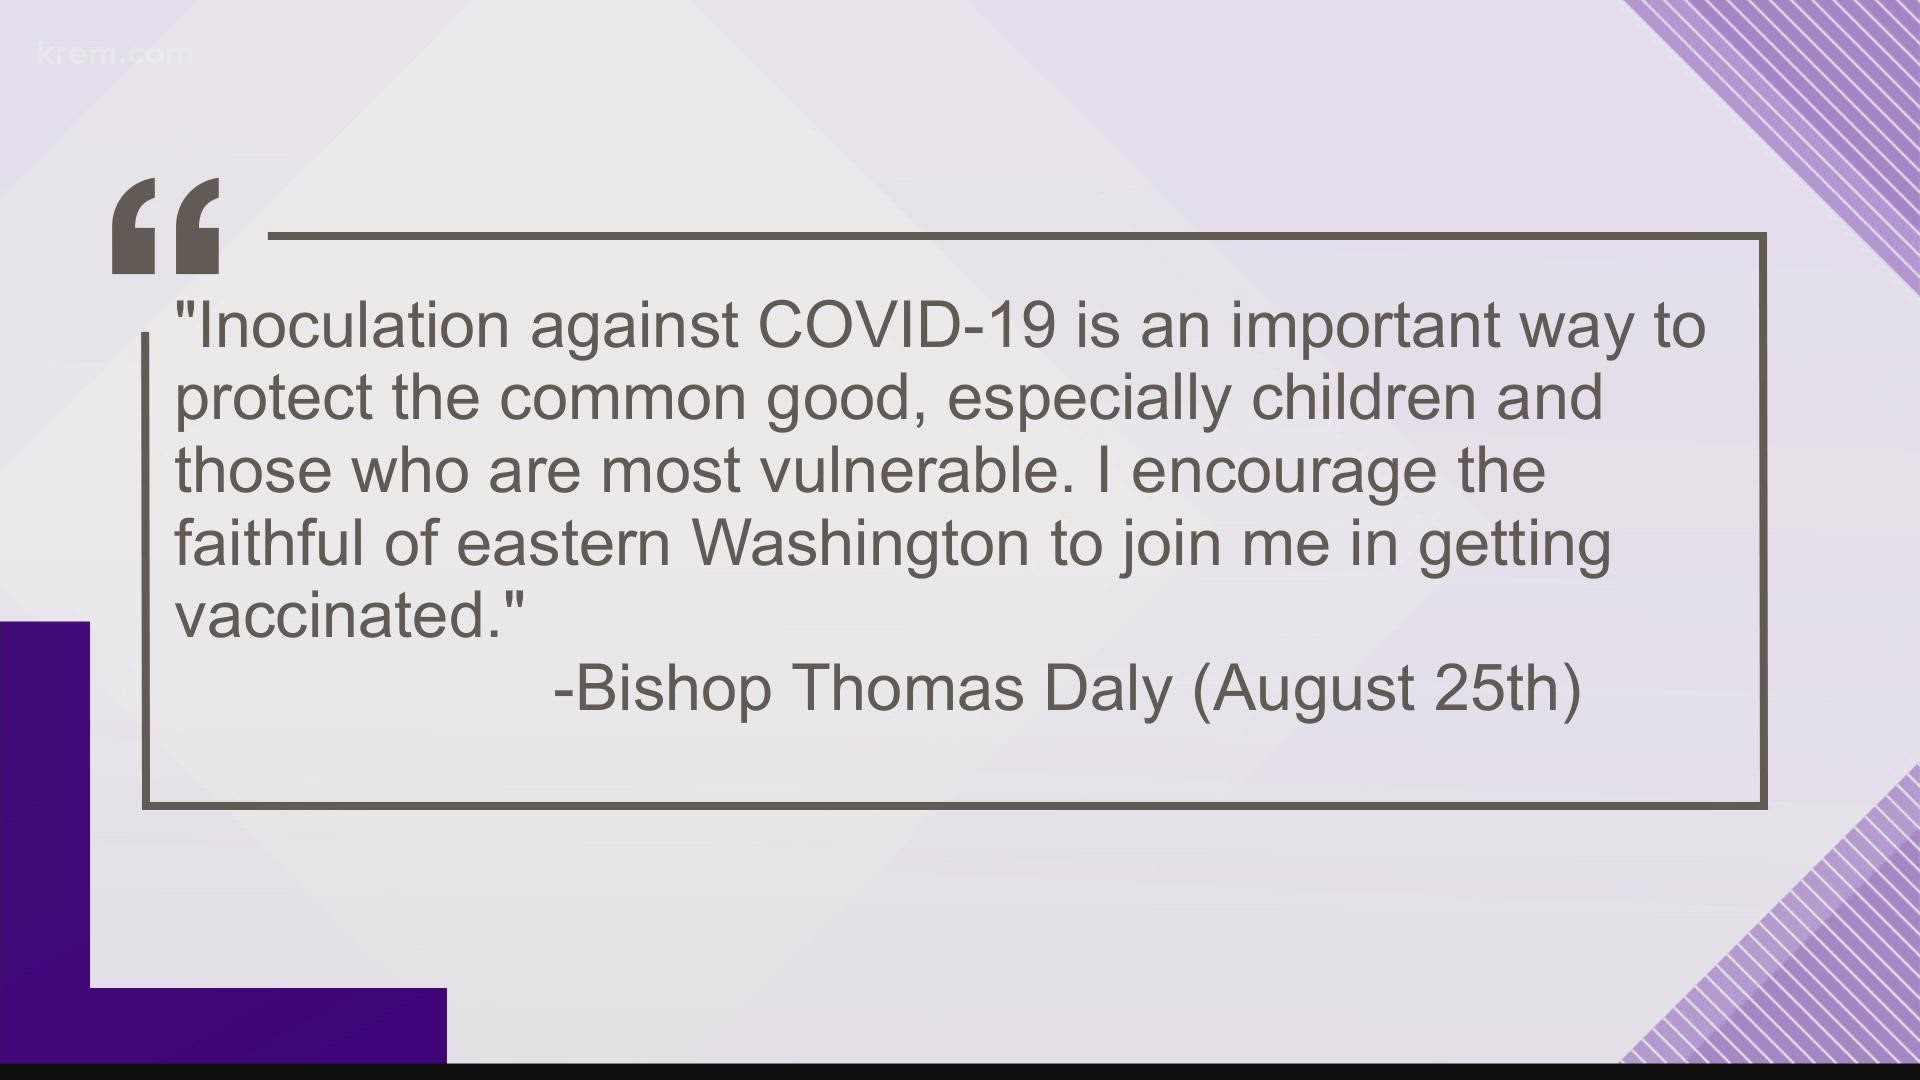 Bishop Daly clarified that parish schools must follow vaccine and mask mandates as well as exemptions allowed under the state's mandate.